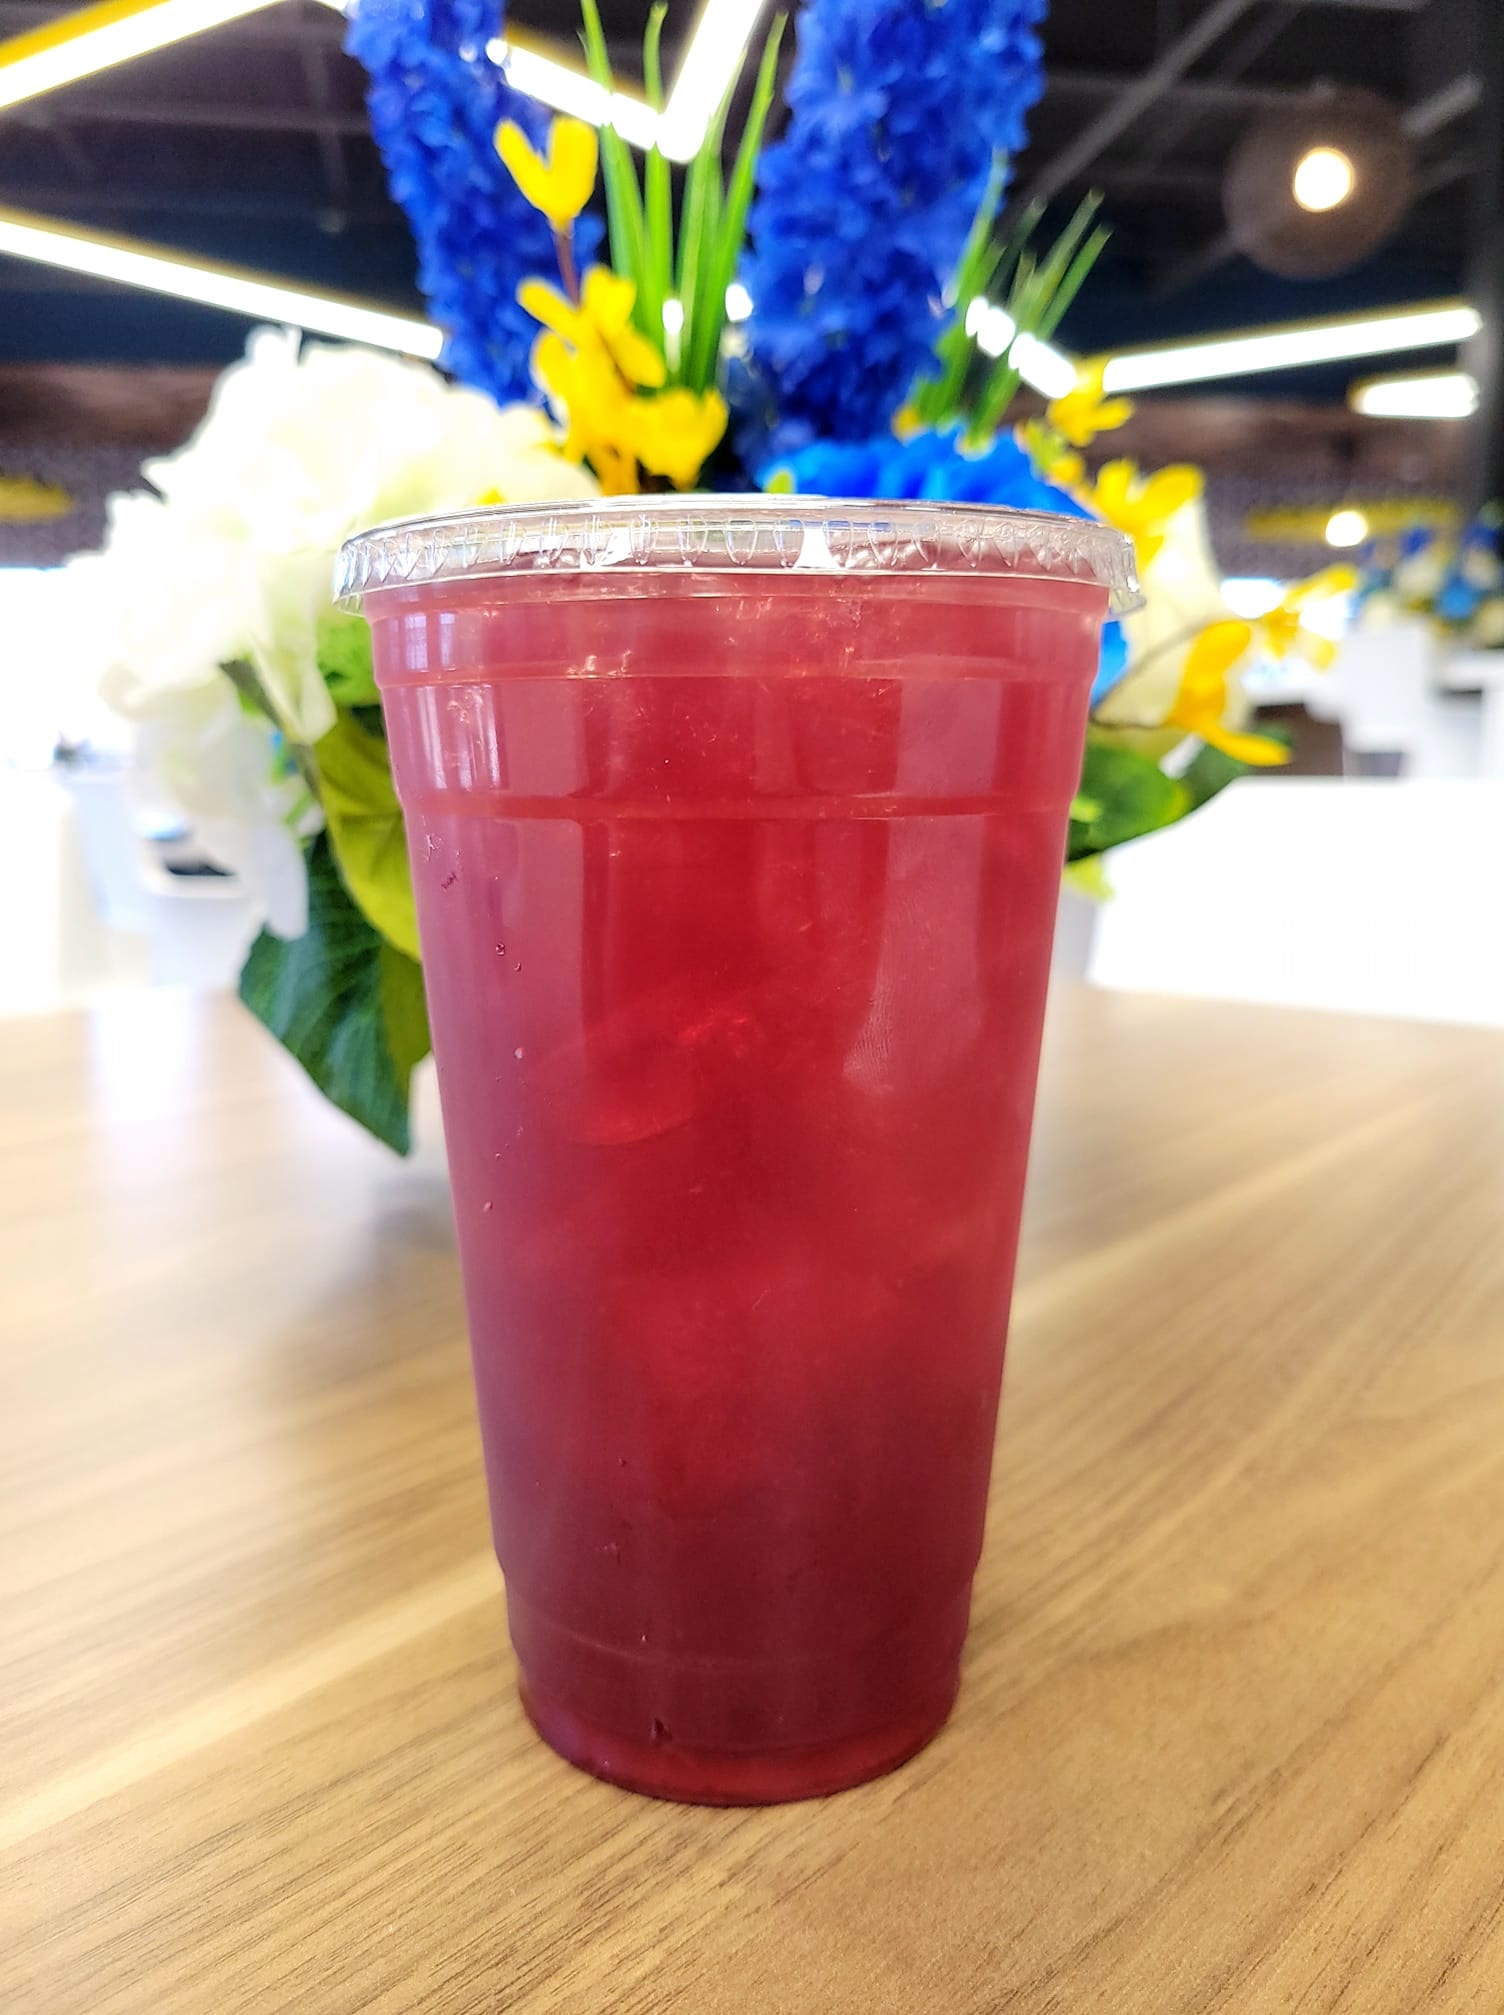 Housemade Fruit Punch